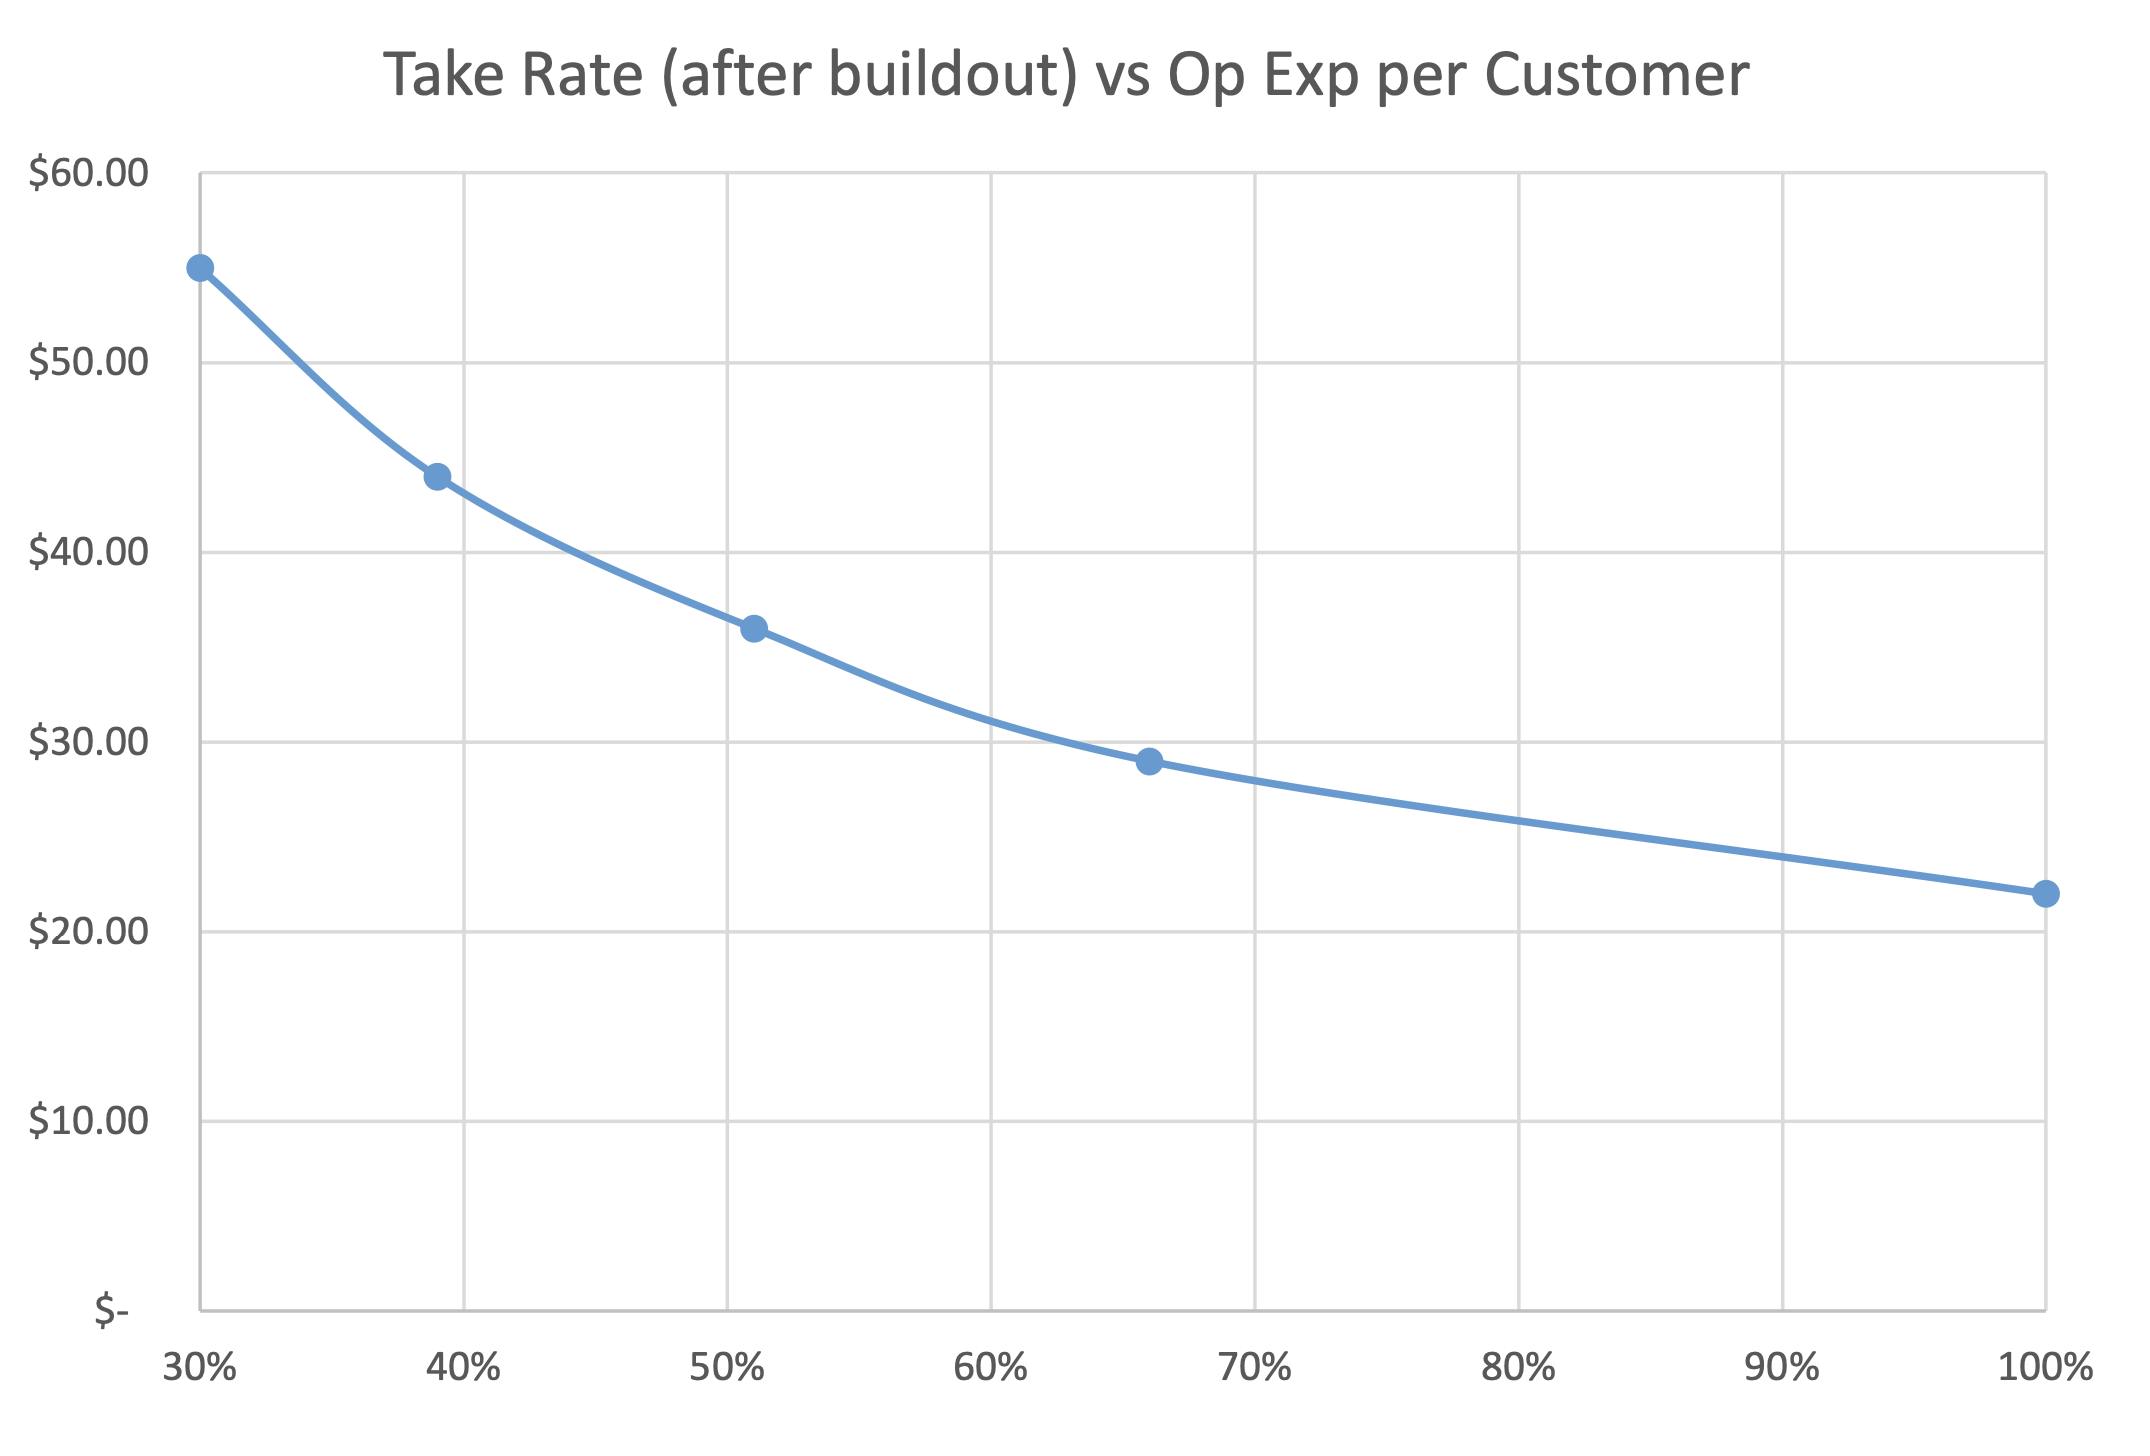 Chart showing rate going from $55 at a 30% take rate to $22 at 100%.